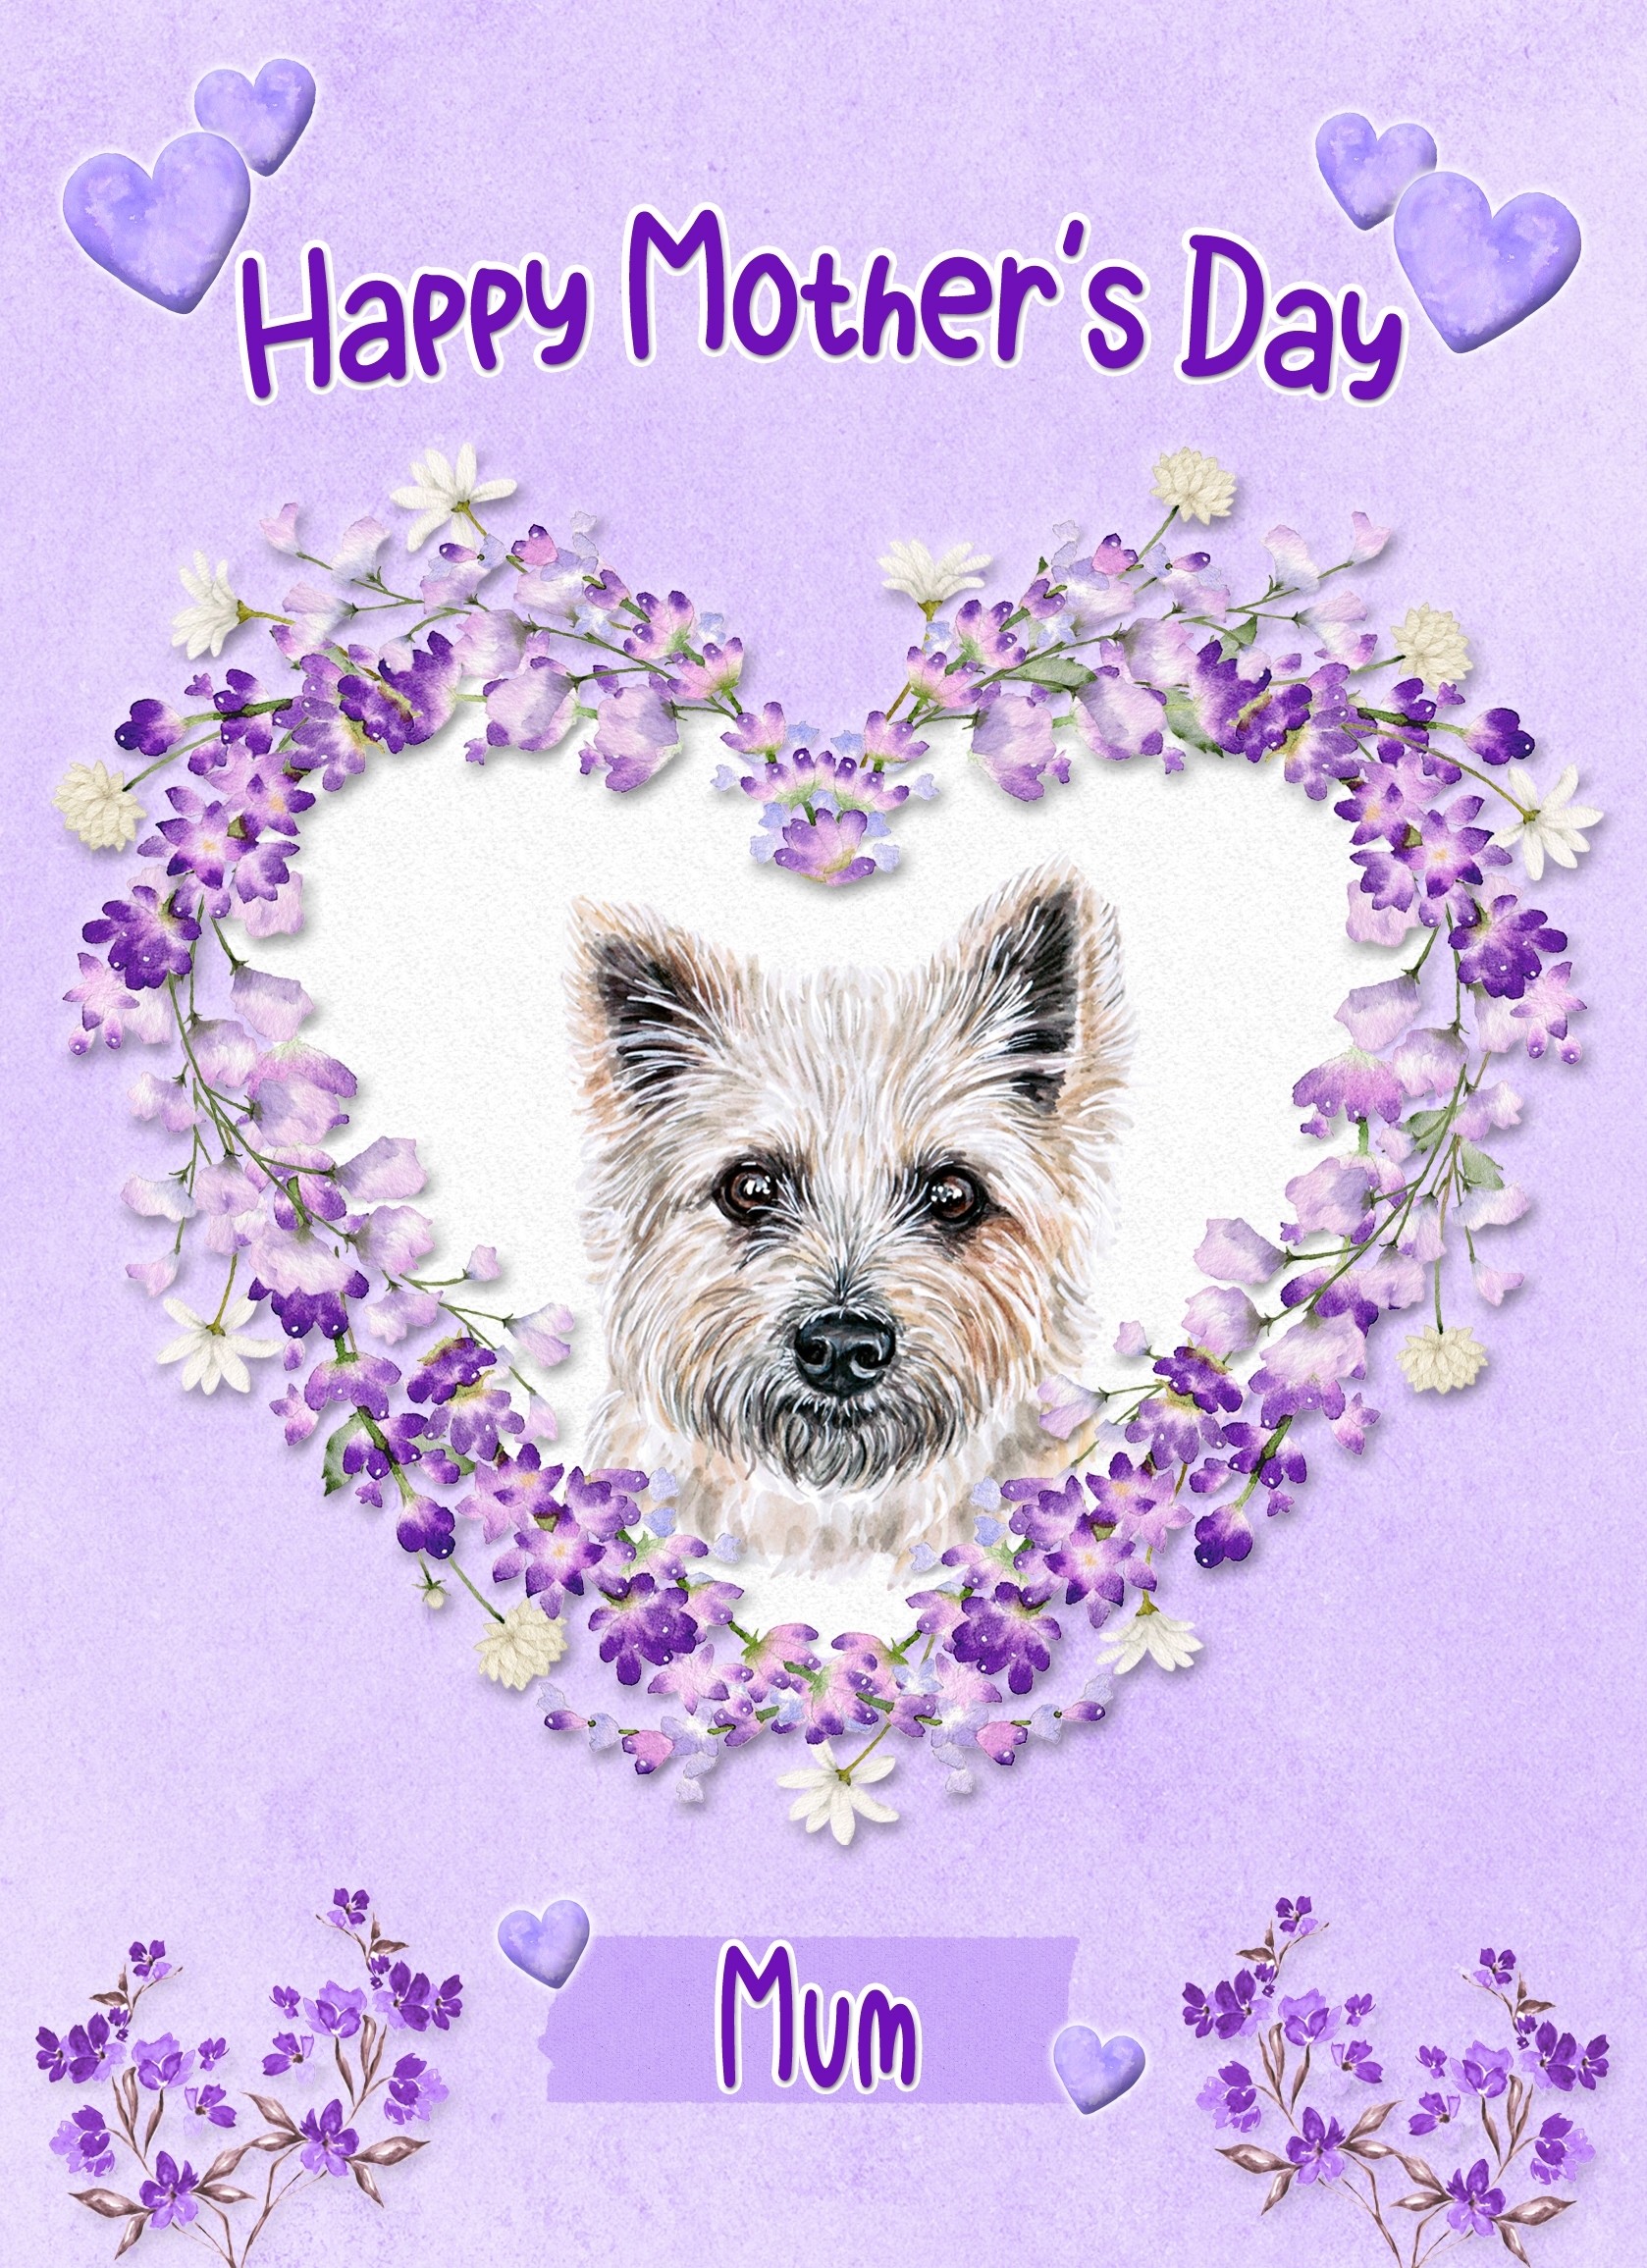 Cairn Terrier Dog Mothers Day Card (Happy Mothers, Mum)